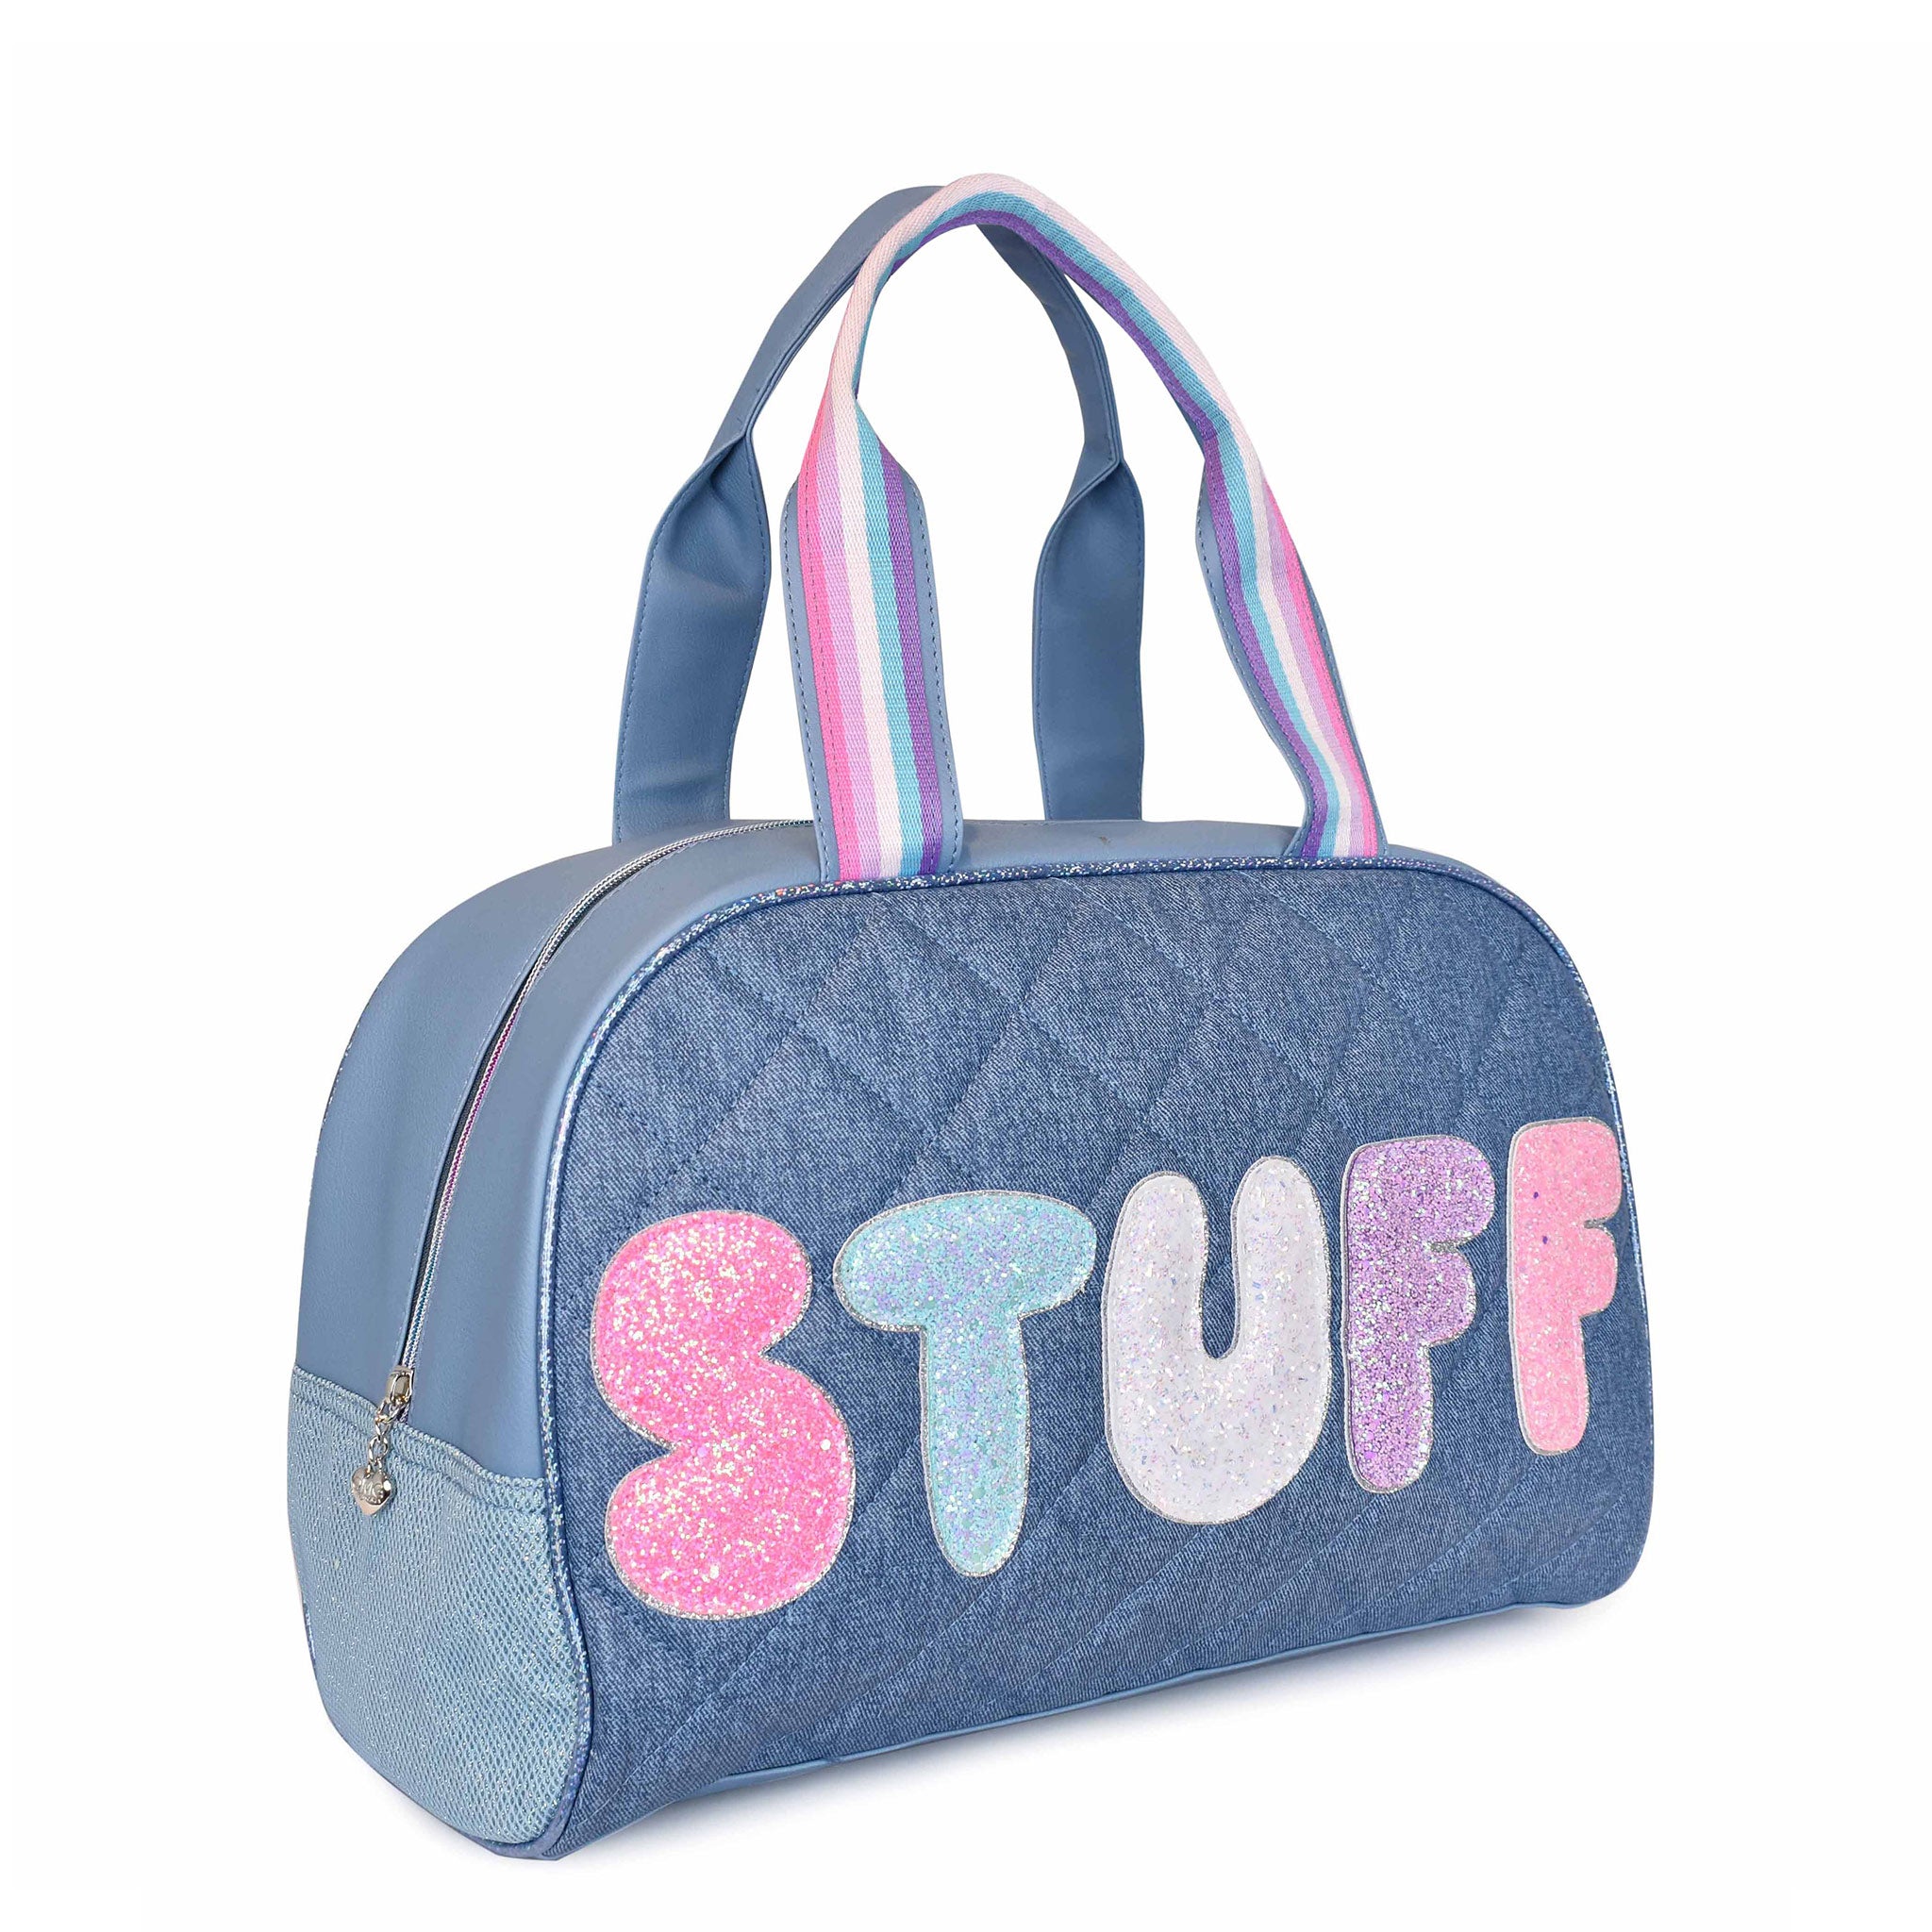 Side view of a denim quilted medium duffle bag with glitter bubble letters 'STUFF'